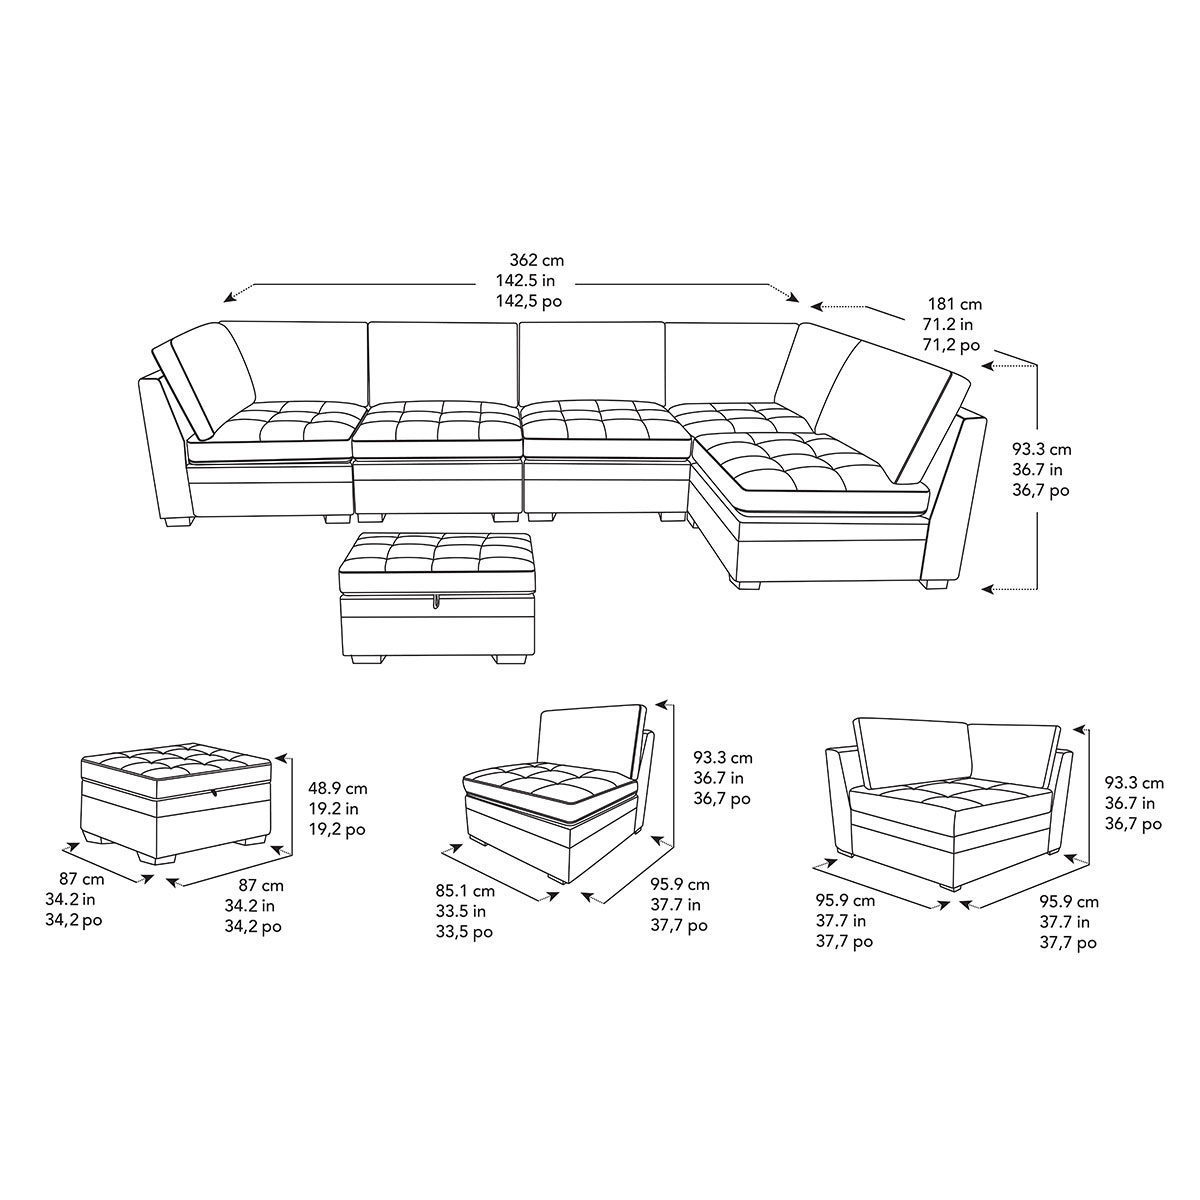 Line drawing of sofa and individual sections with dimensions